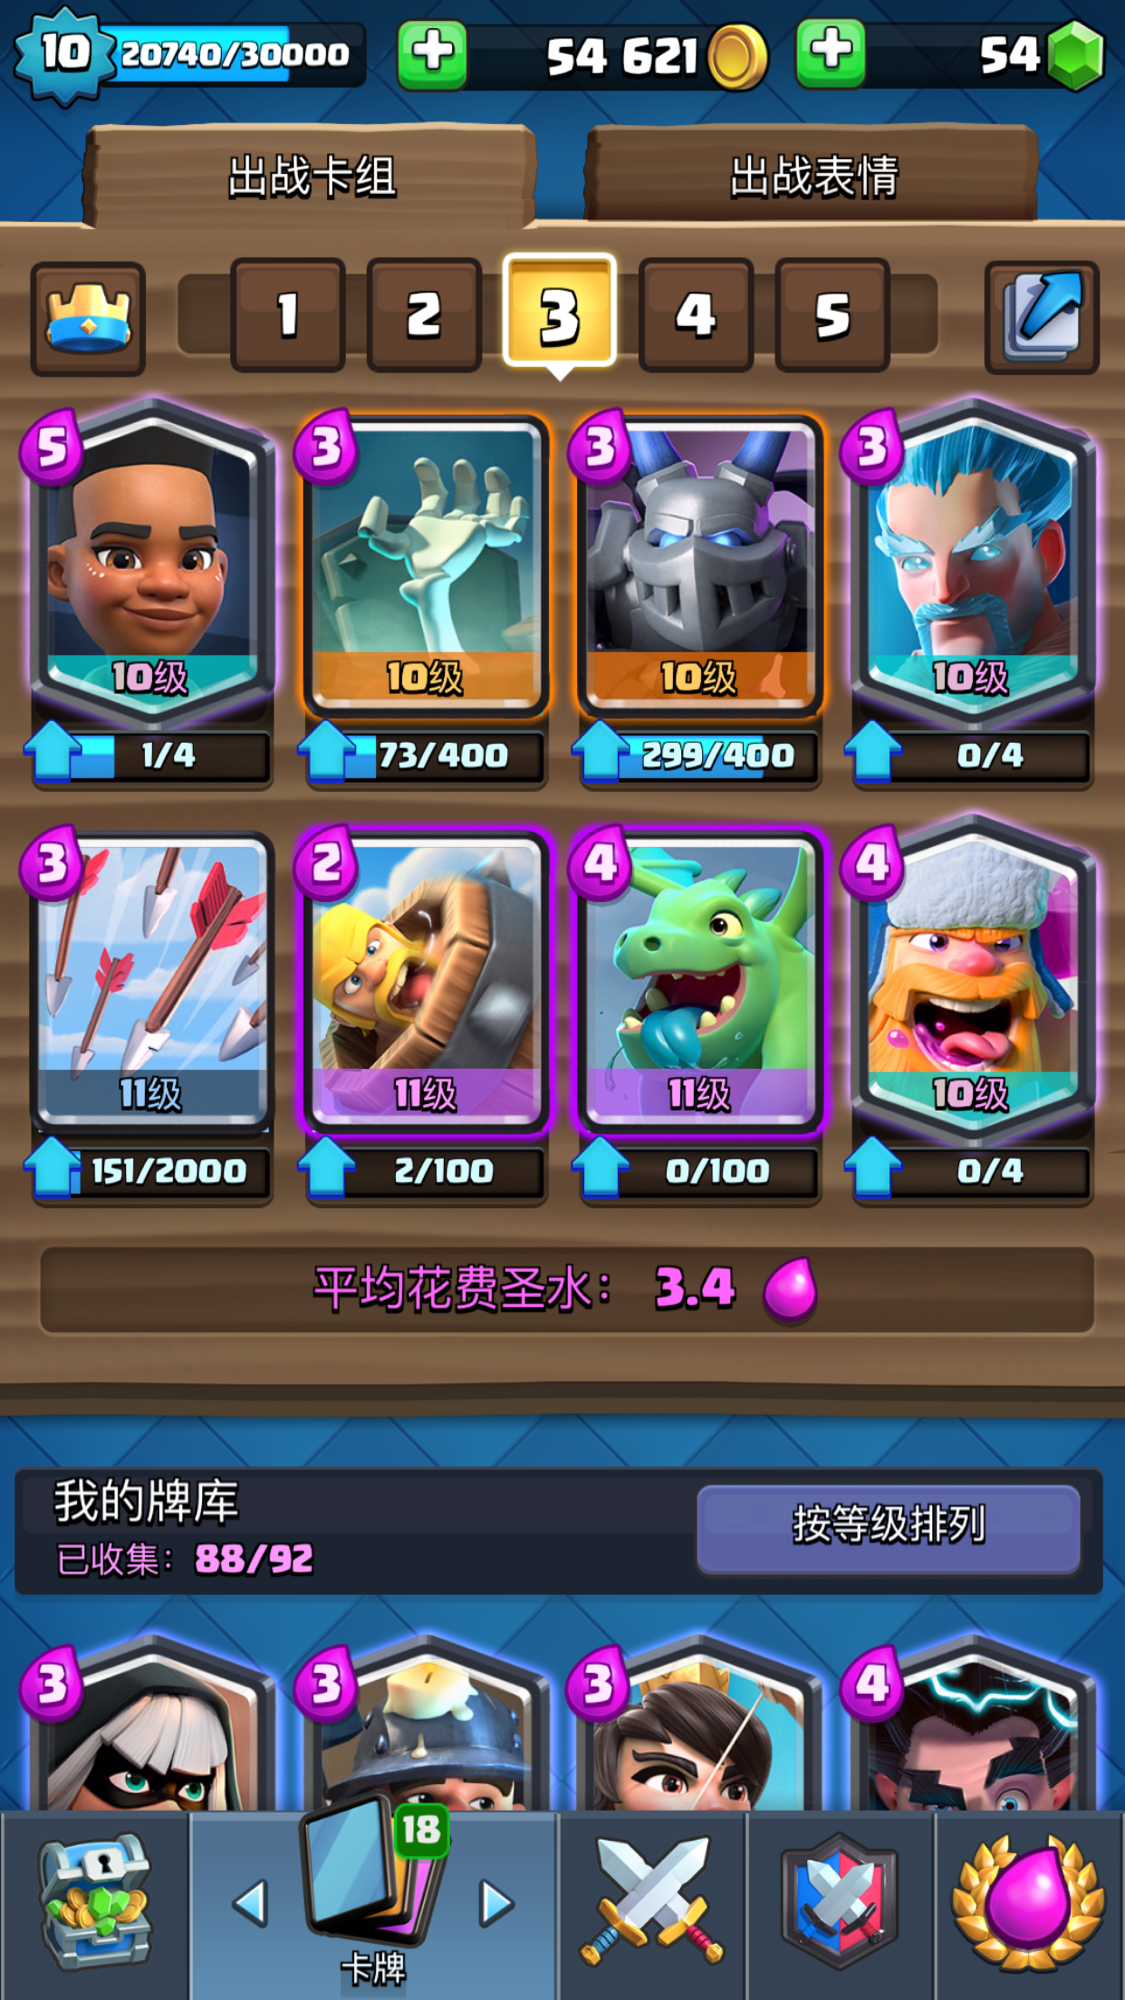 Just got Ram Rider. Any good decks her in I'd love to know! | Fandom